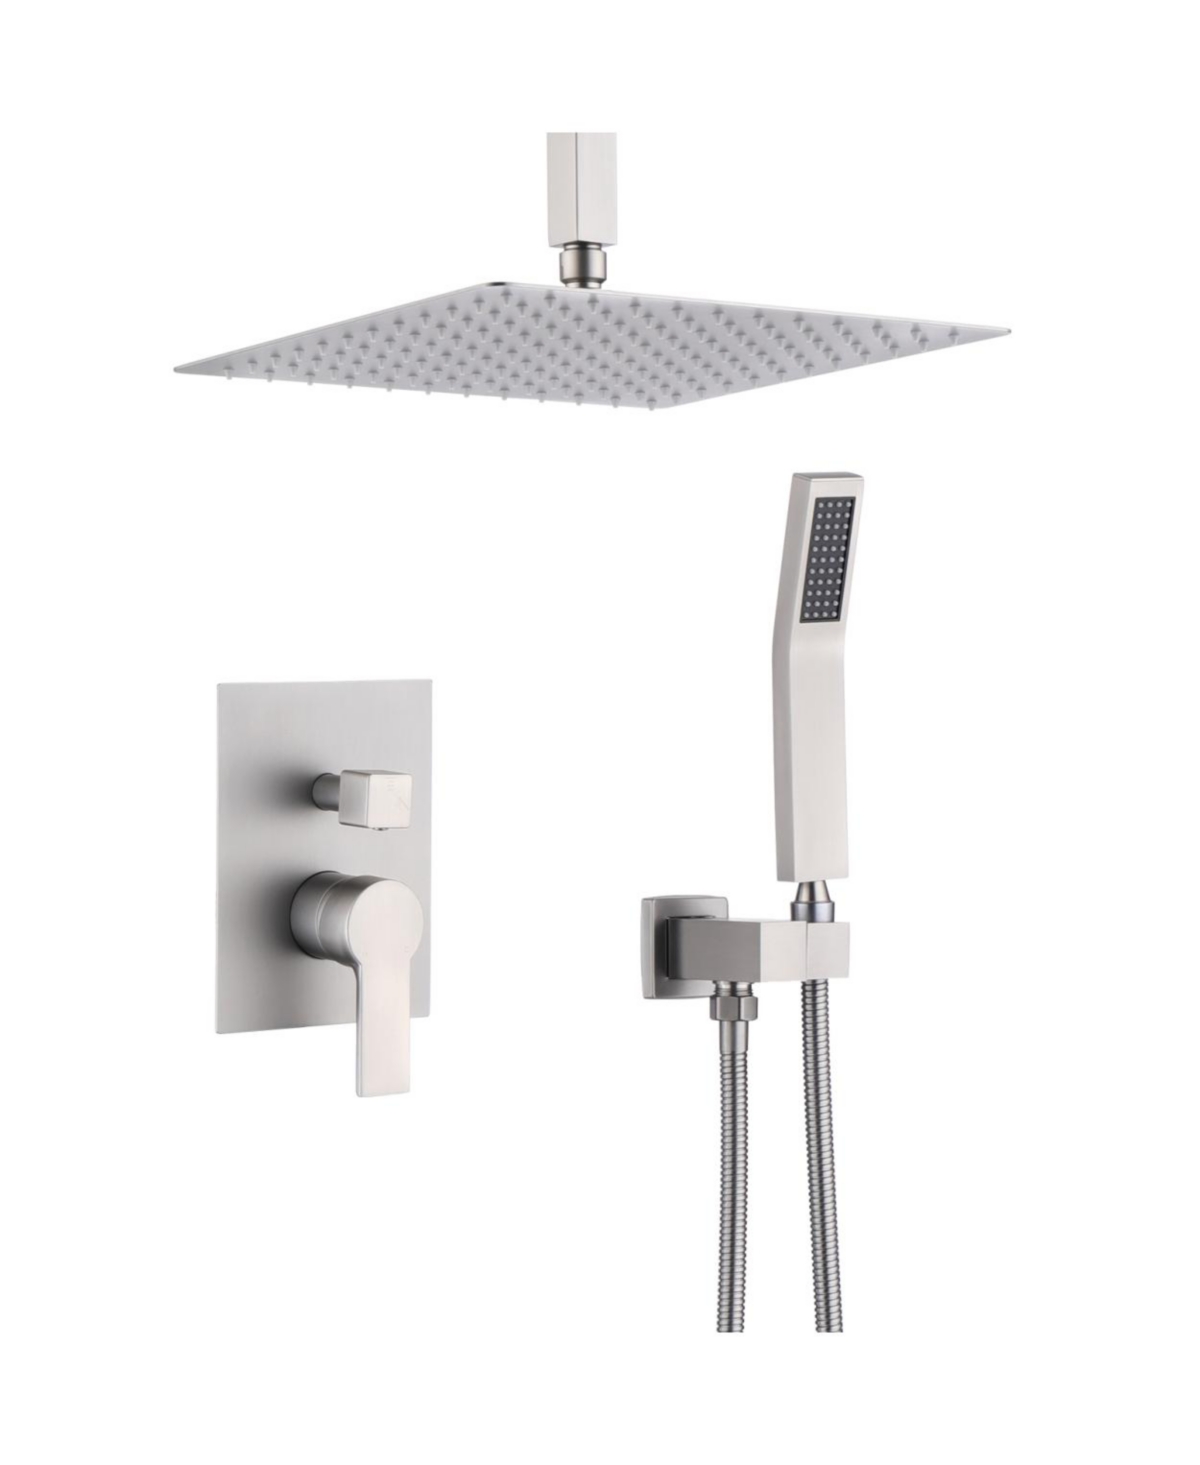 12 Inch Bathroom Rain Shower Combo Set With Hand Shower - Silver